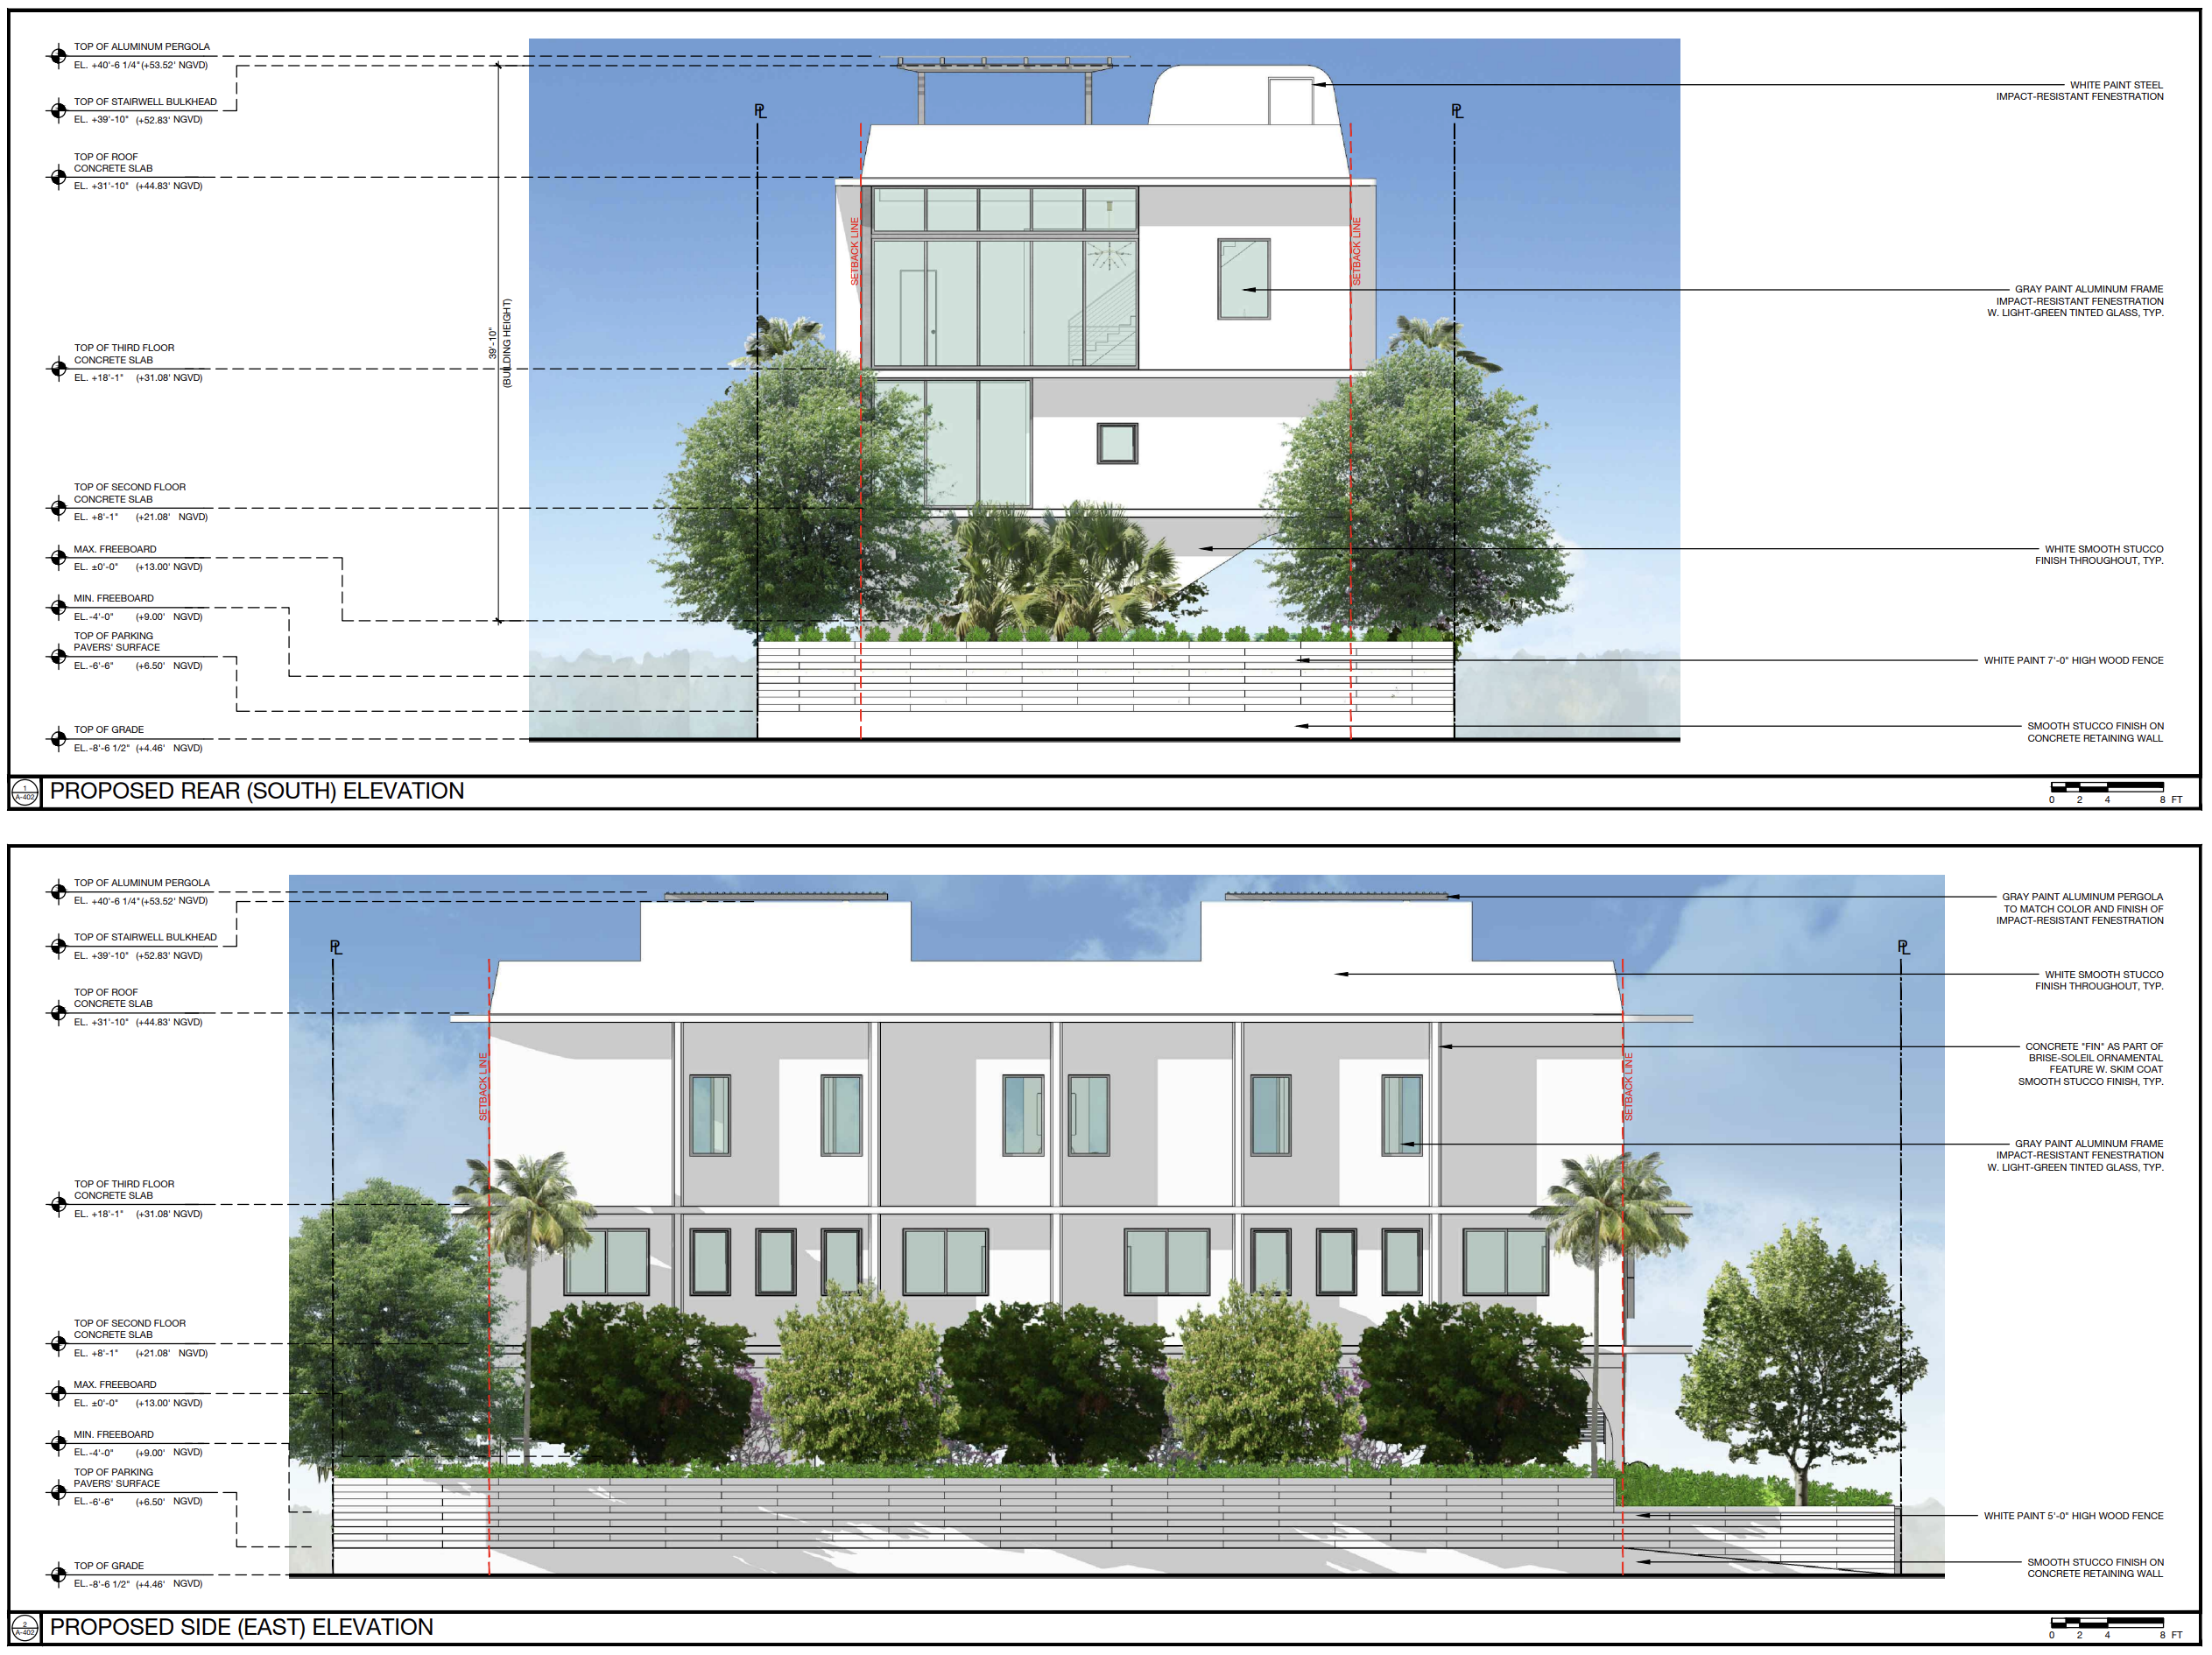 800 84th Street. Courtesy of CDS Architecture and Planning.